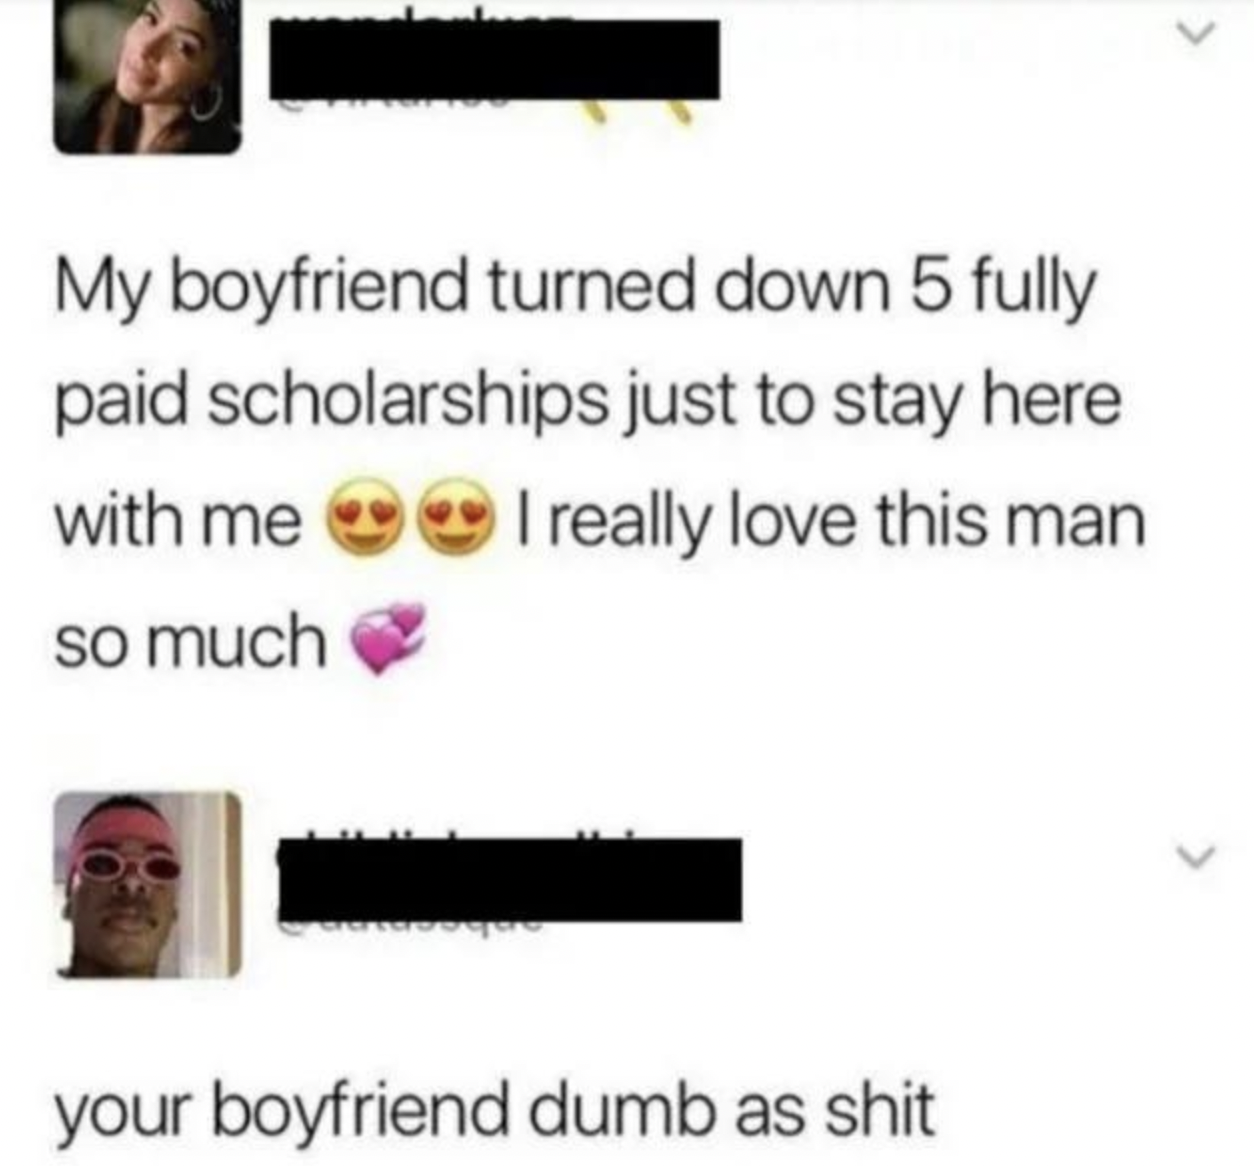 Funny facepalms - paper - My boyfriend turned down 5 fully paid scholarships just to stay here with me I really love this man so much your boyfriend dumb as shit